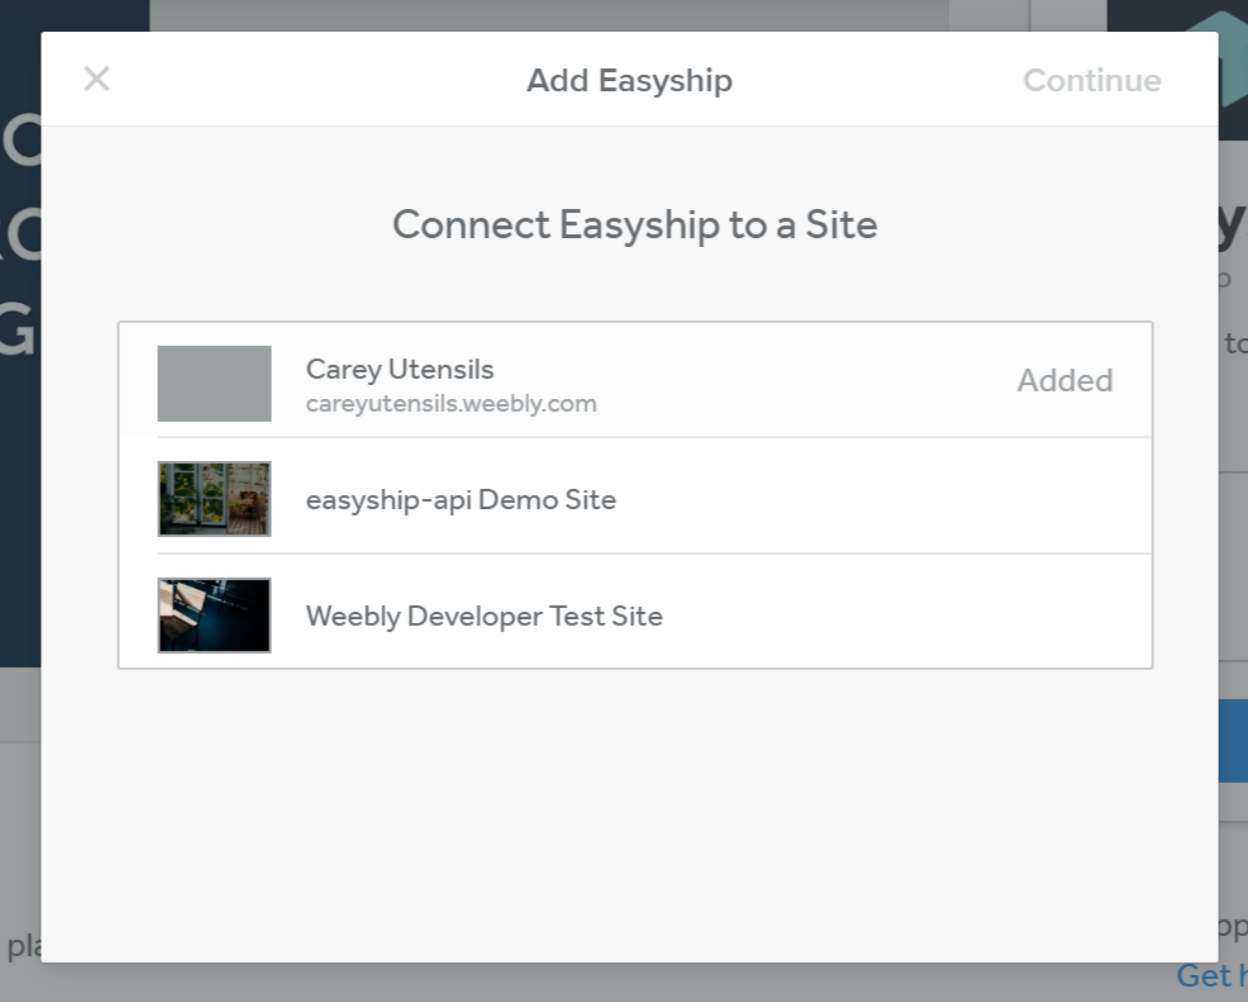 Select Weebly Site to Integrate with Easyship